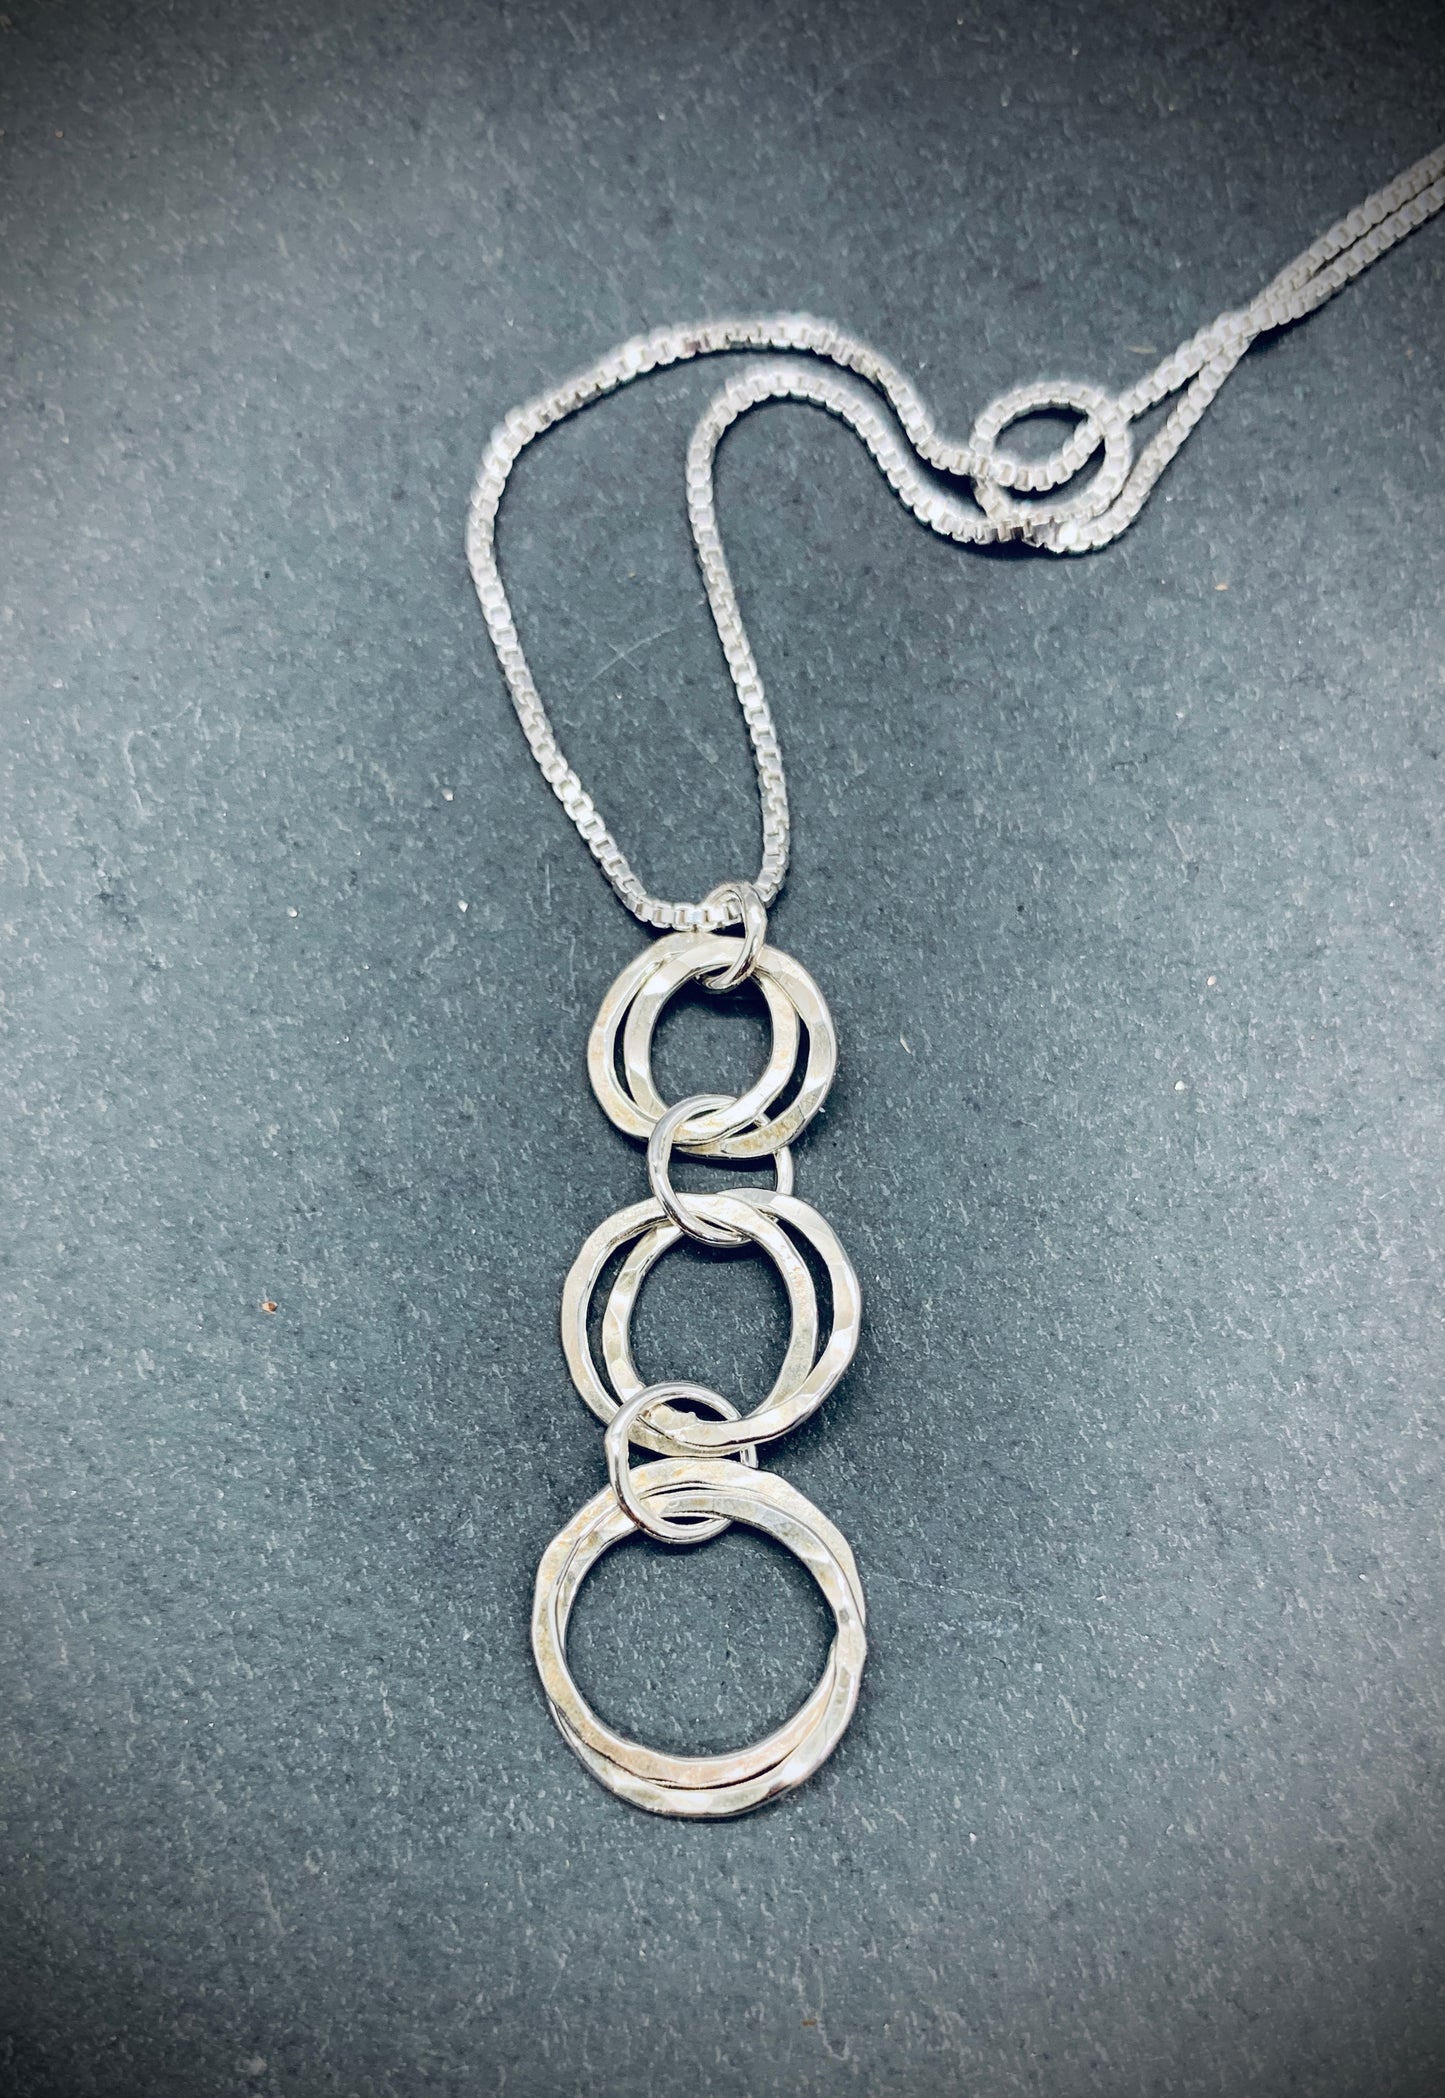 Hammered ring Necklace